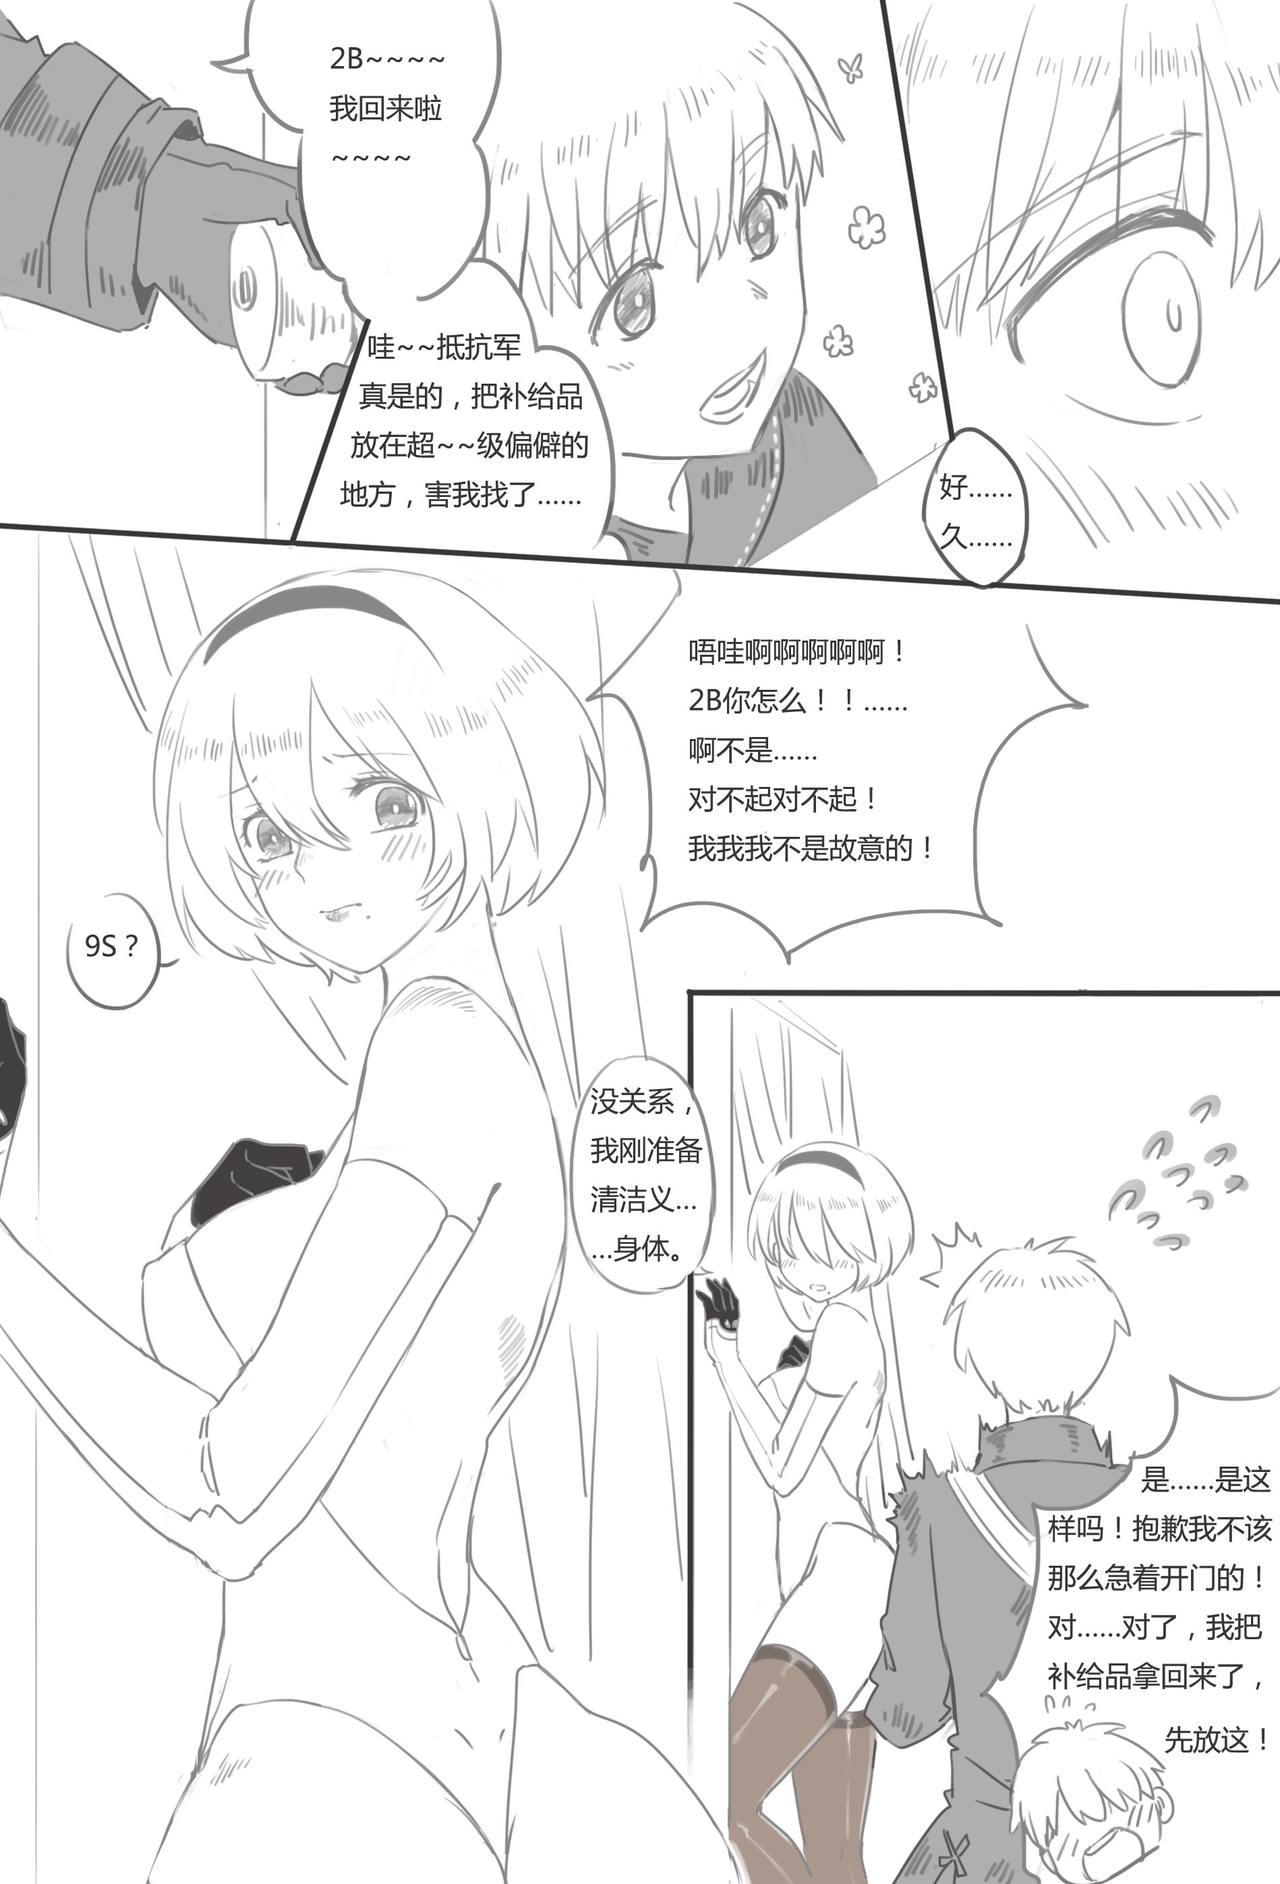 Pussy Fingering [WS] 9Sx2B - Life after the [E] end. (NieR:Automata) [Chinese] - Nier automata Sex Toy - Page 3